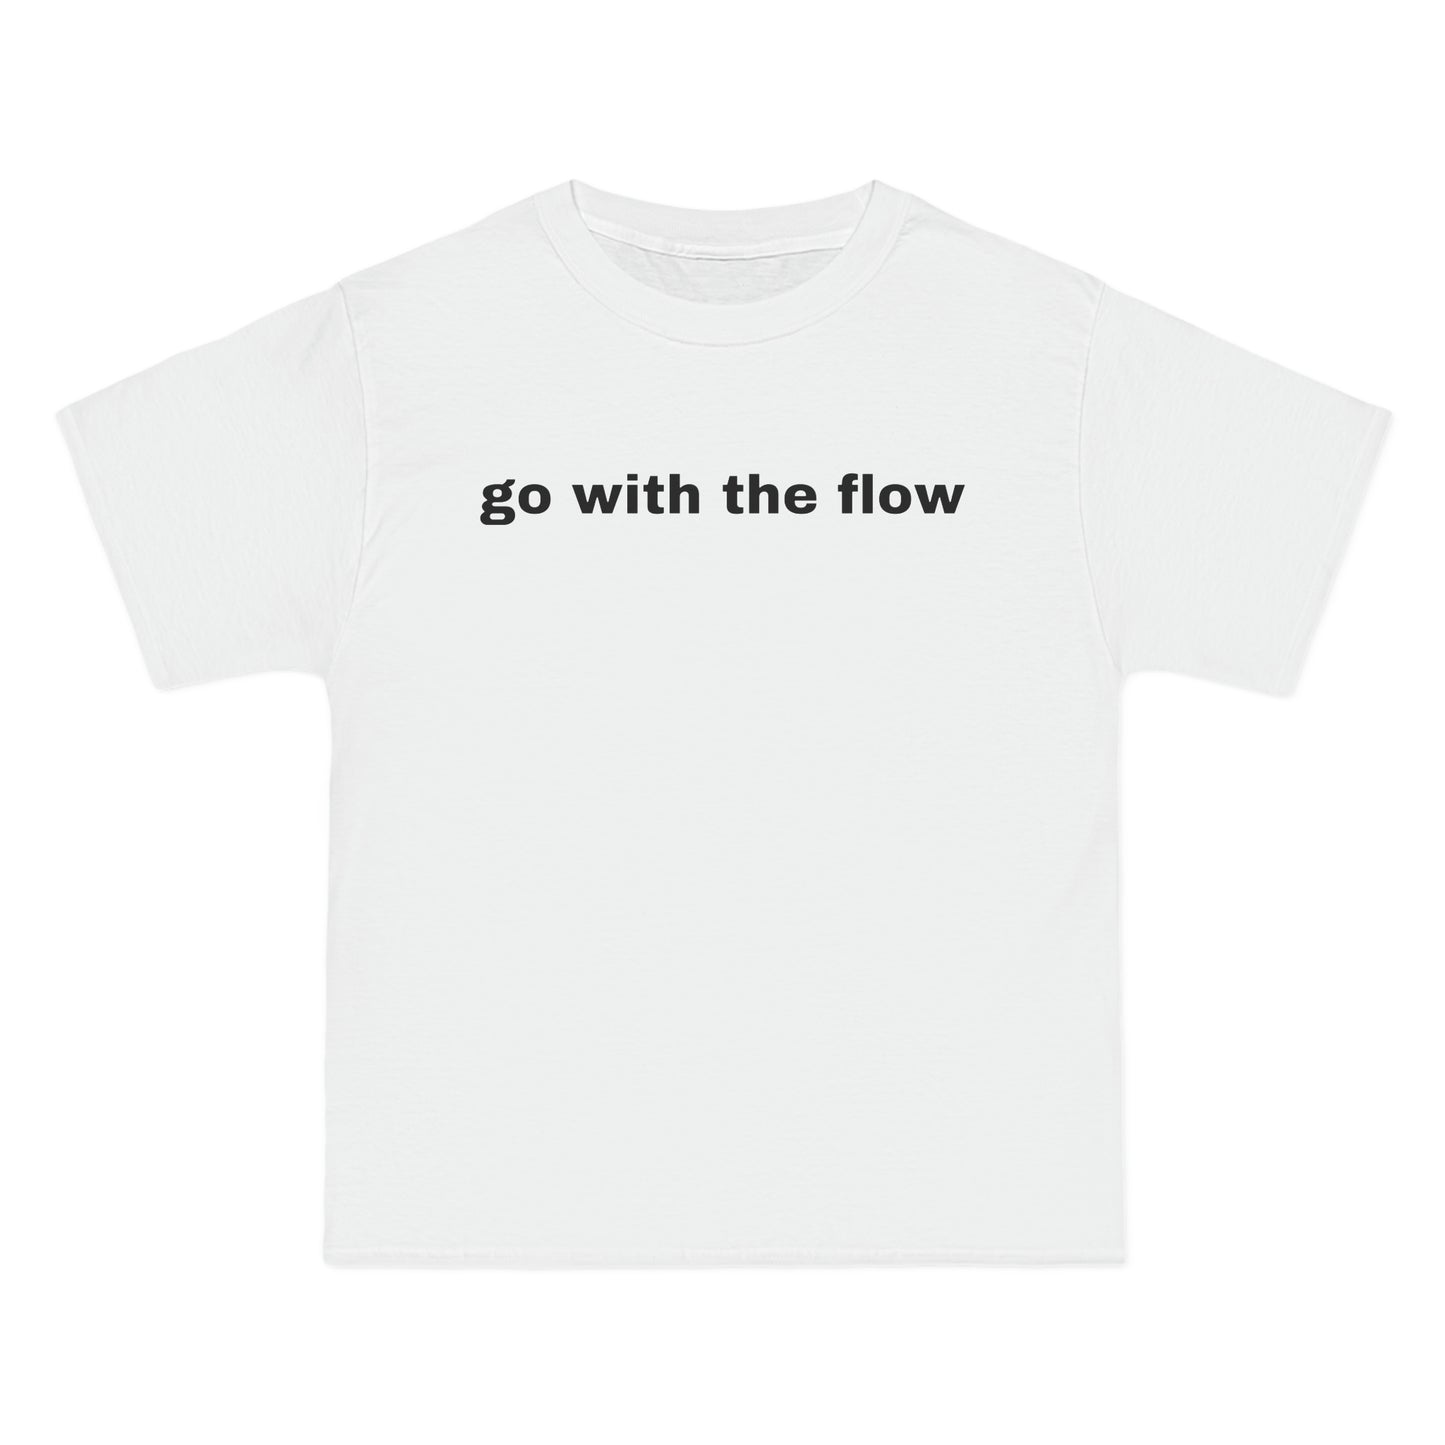 go with the flow Tee